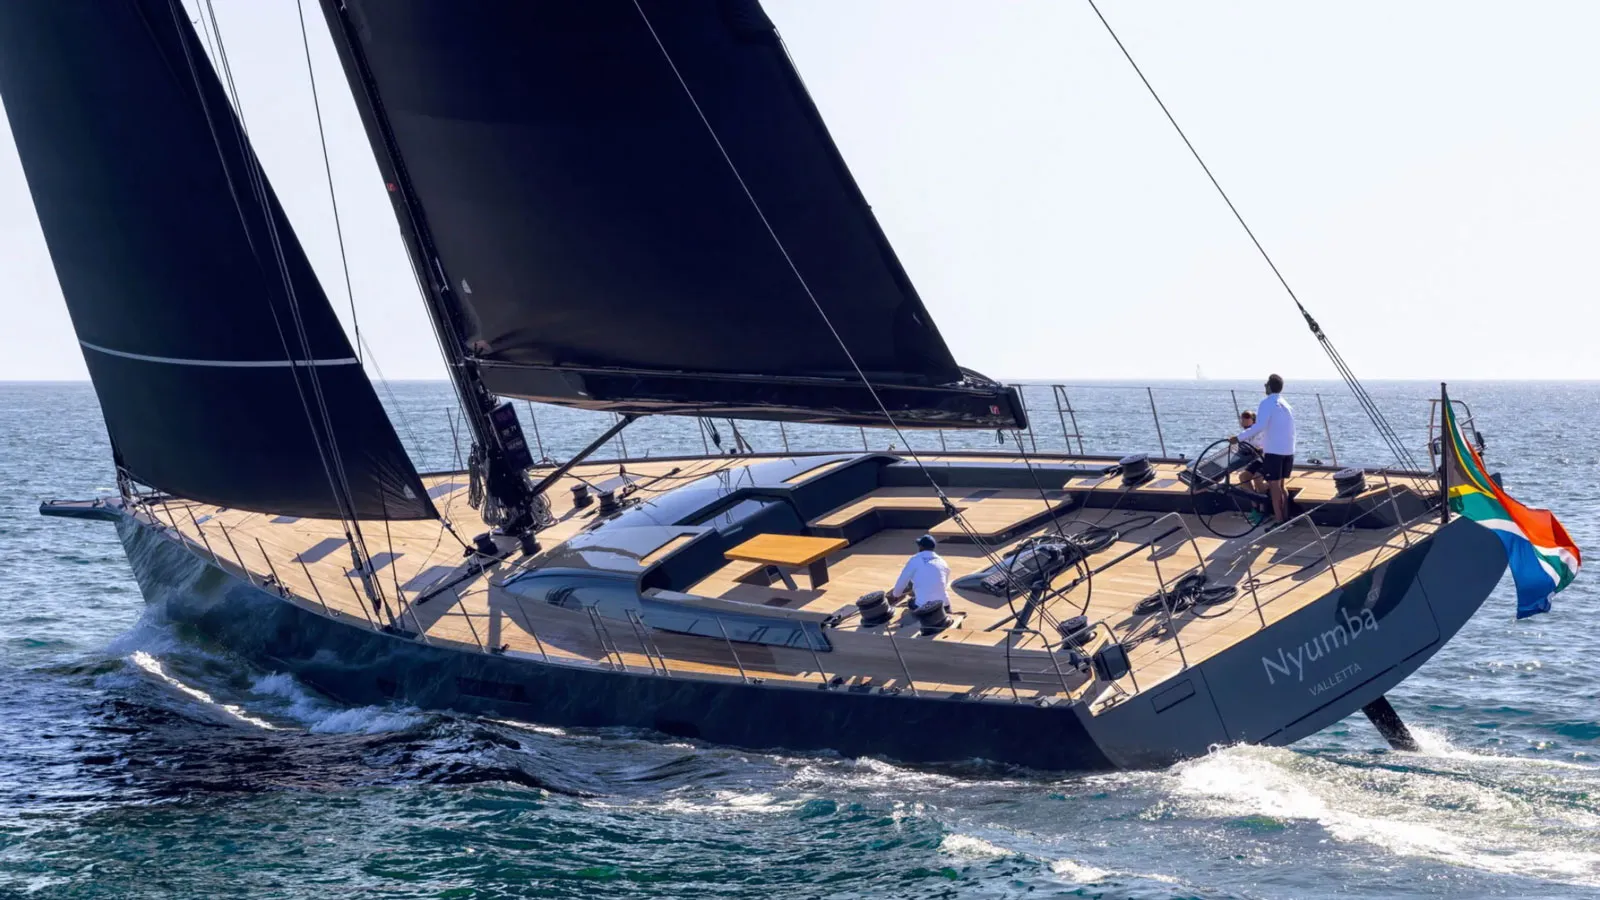 Nyumba Sailing Yacht by Southern Wind Shipyard . Guide by Baldo Realty Group for the Cannes Yachting Festival